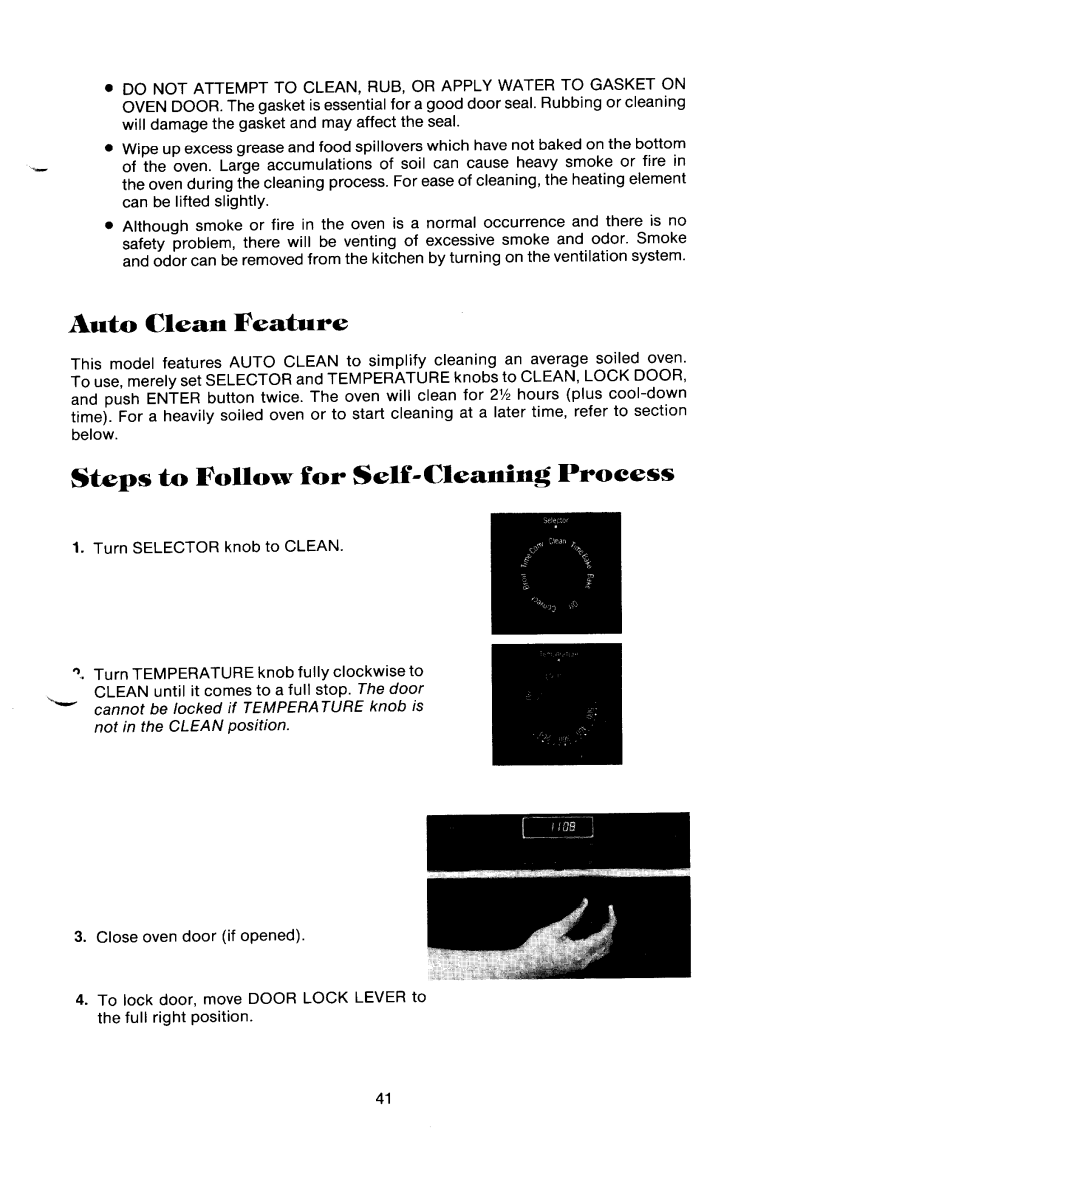 Jenn-Air SEG196 manual Auto Clean Feature, Steps to Follow for Self-CleaningProcess 